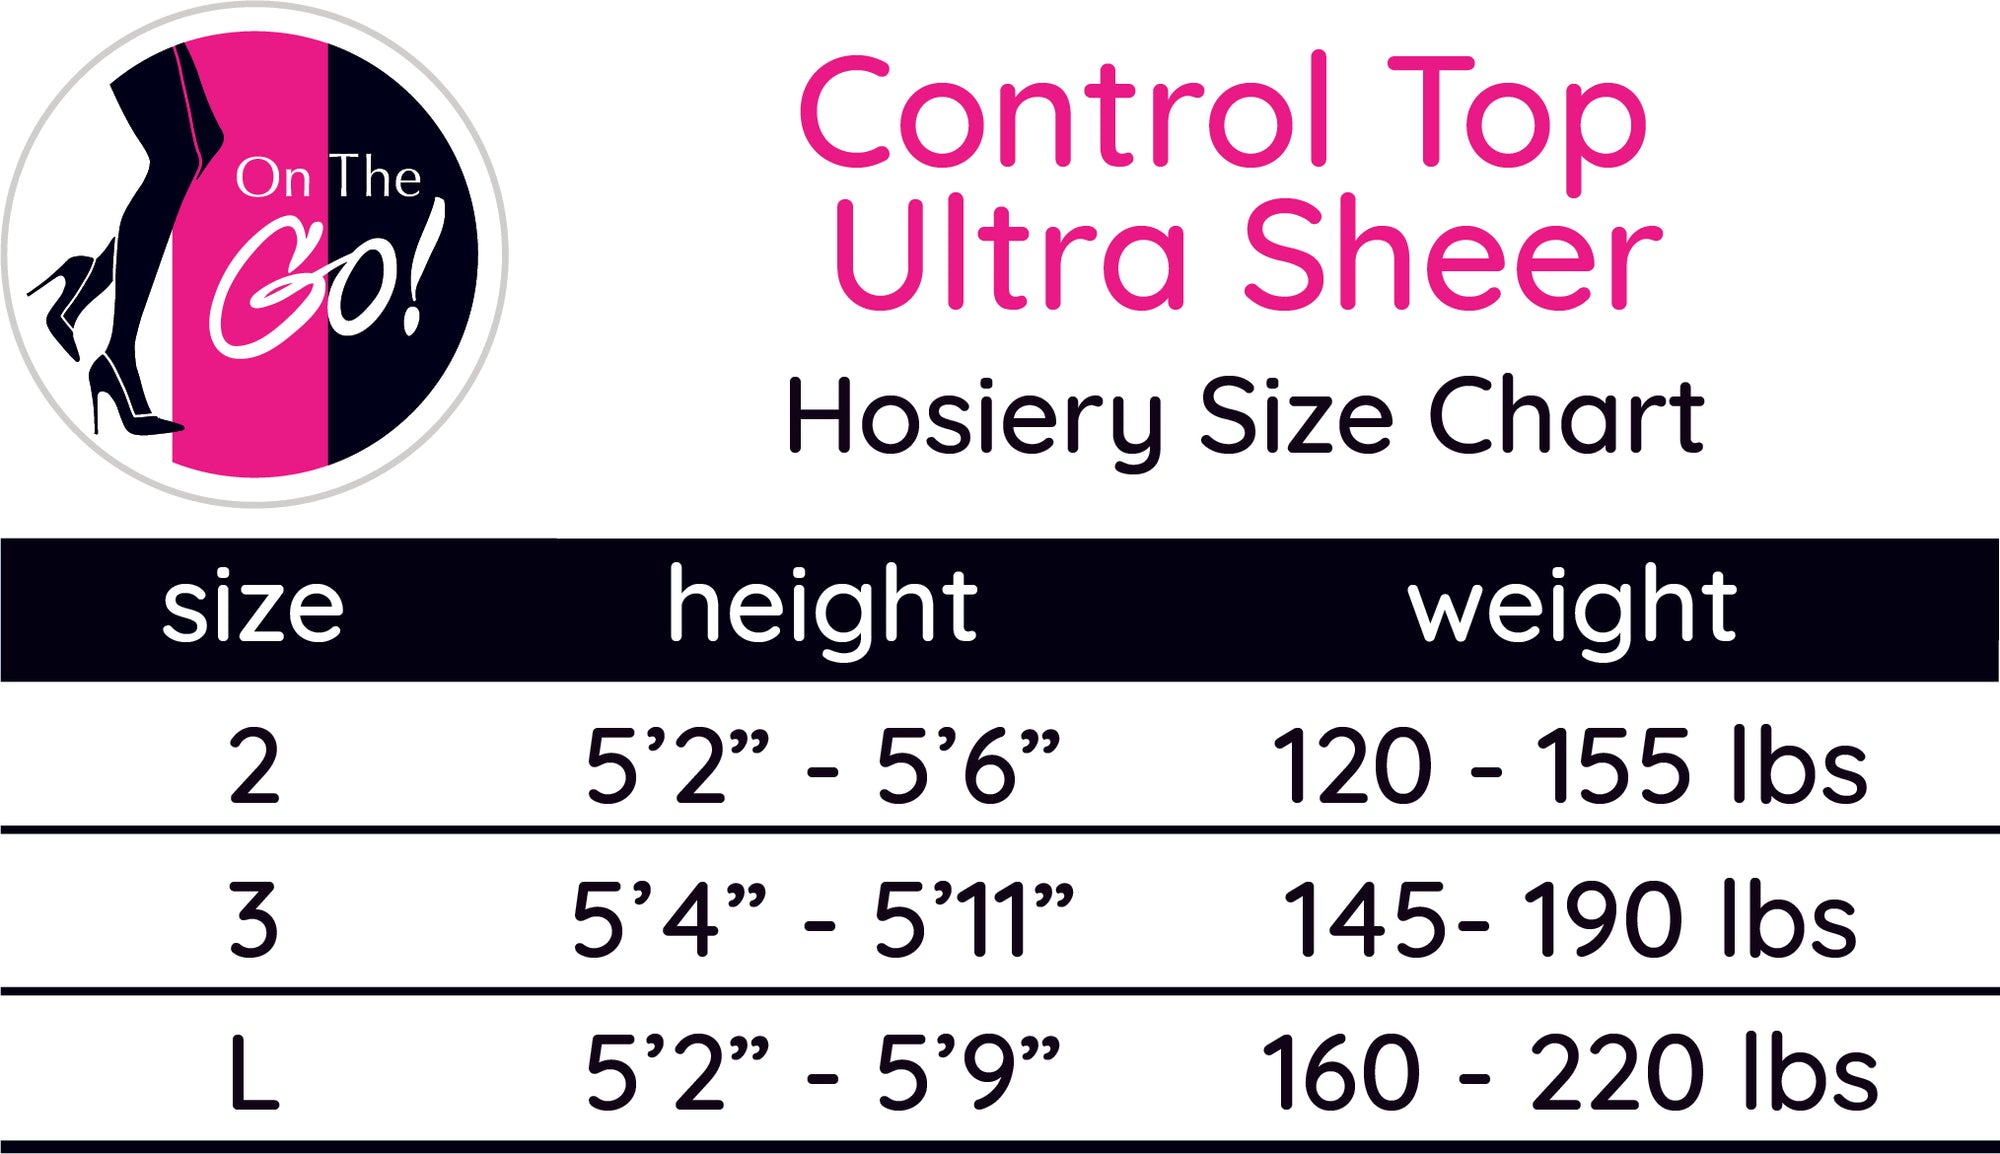 On The Go! Ultra Sheer Control Top Queen - Coffee, 1 ct - Kroger